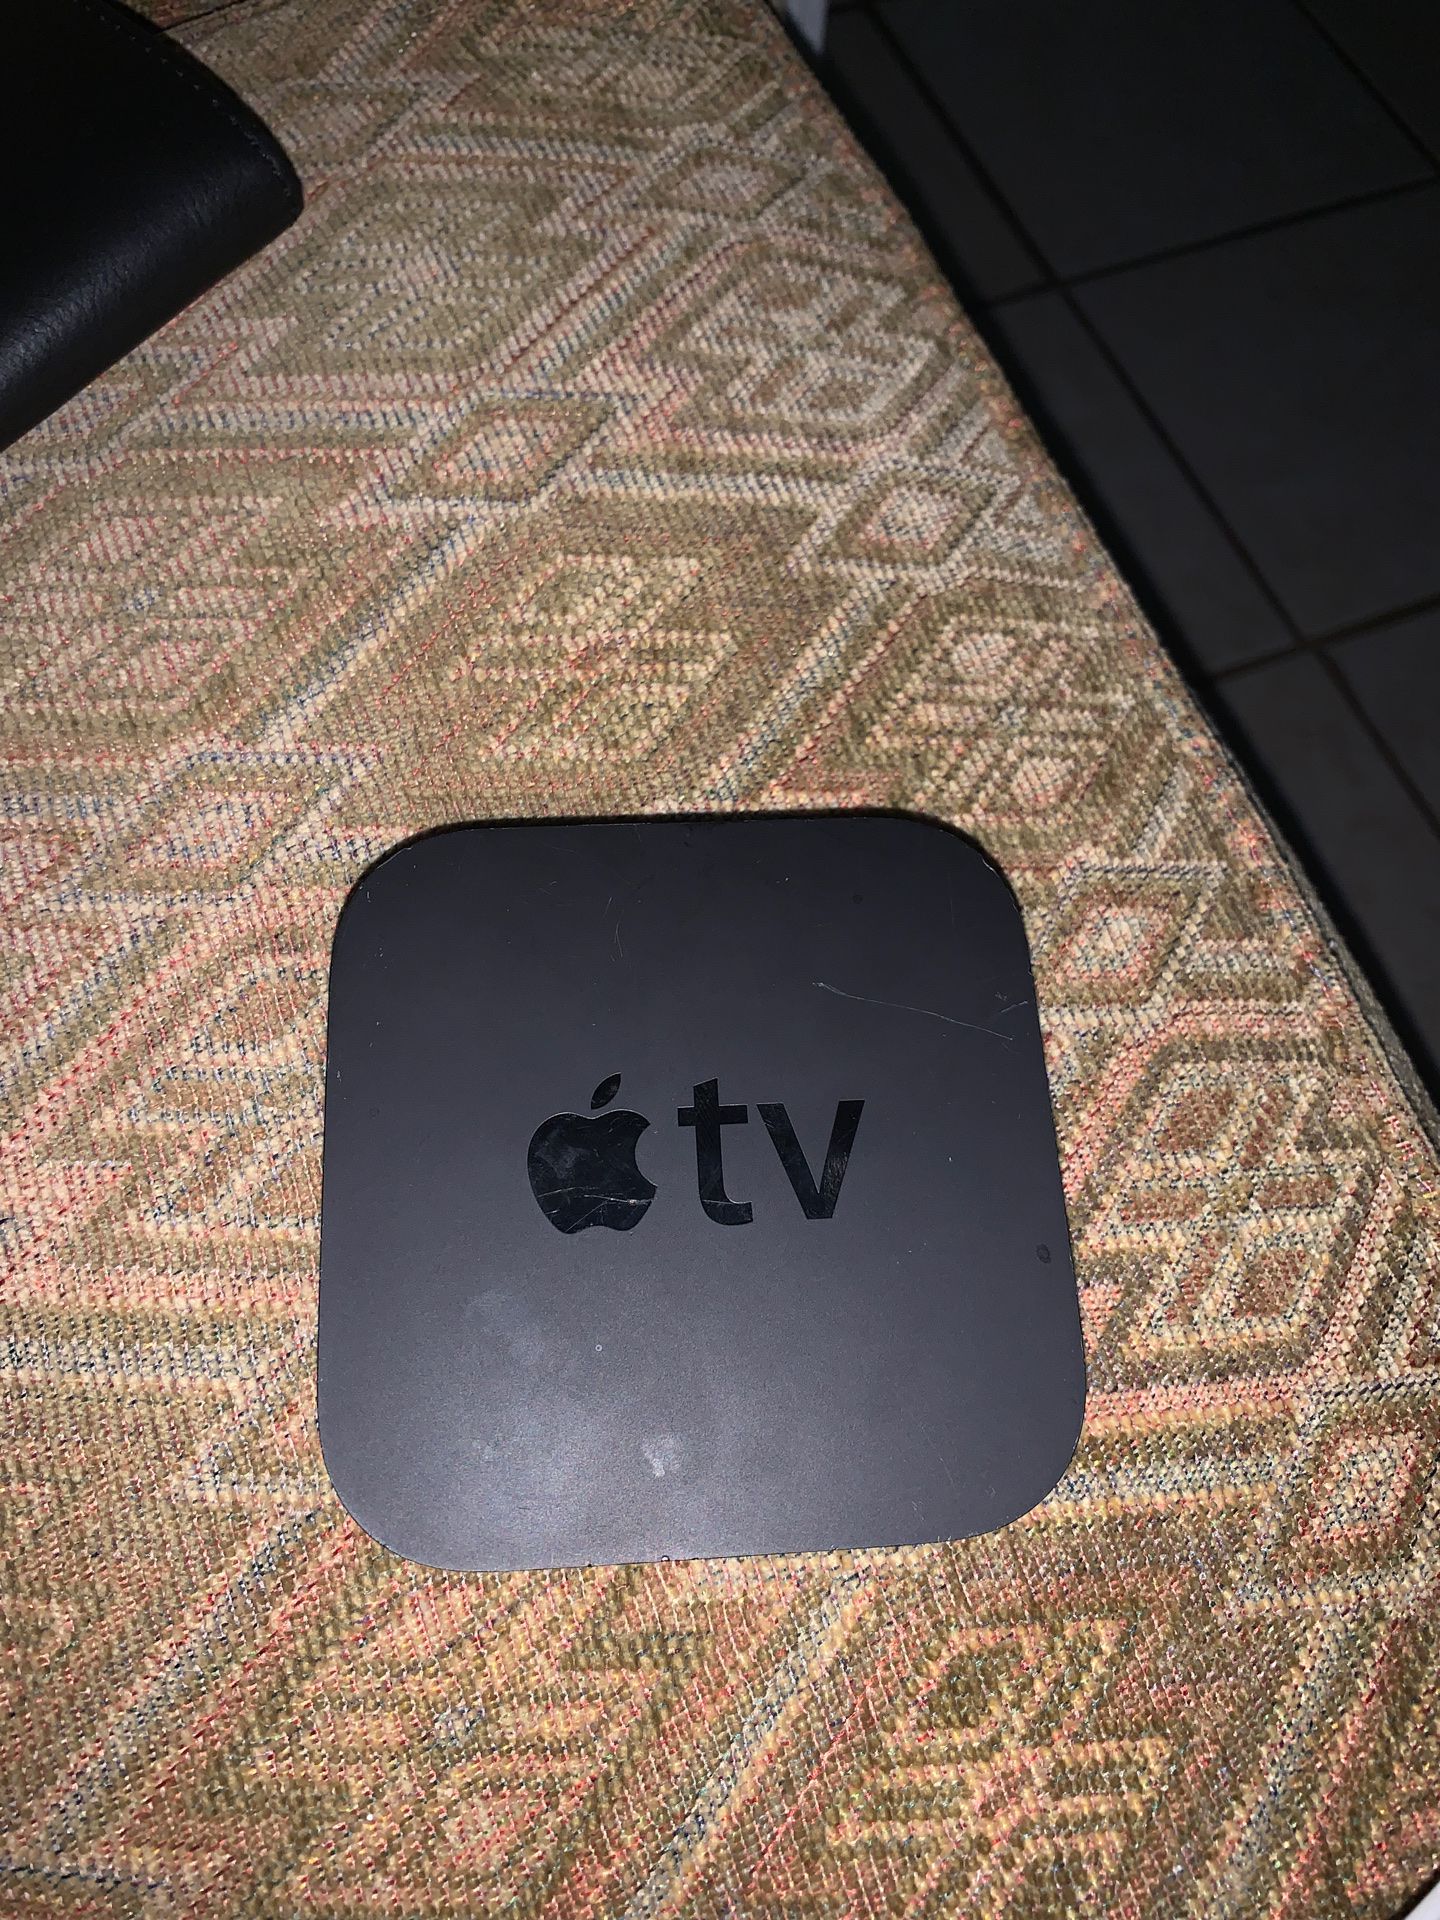 Apple tv by its self